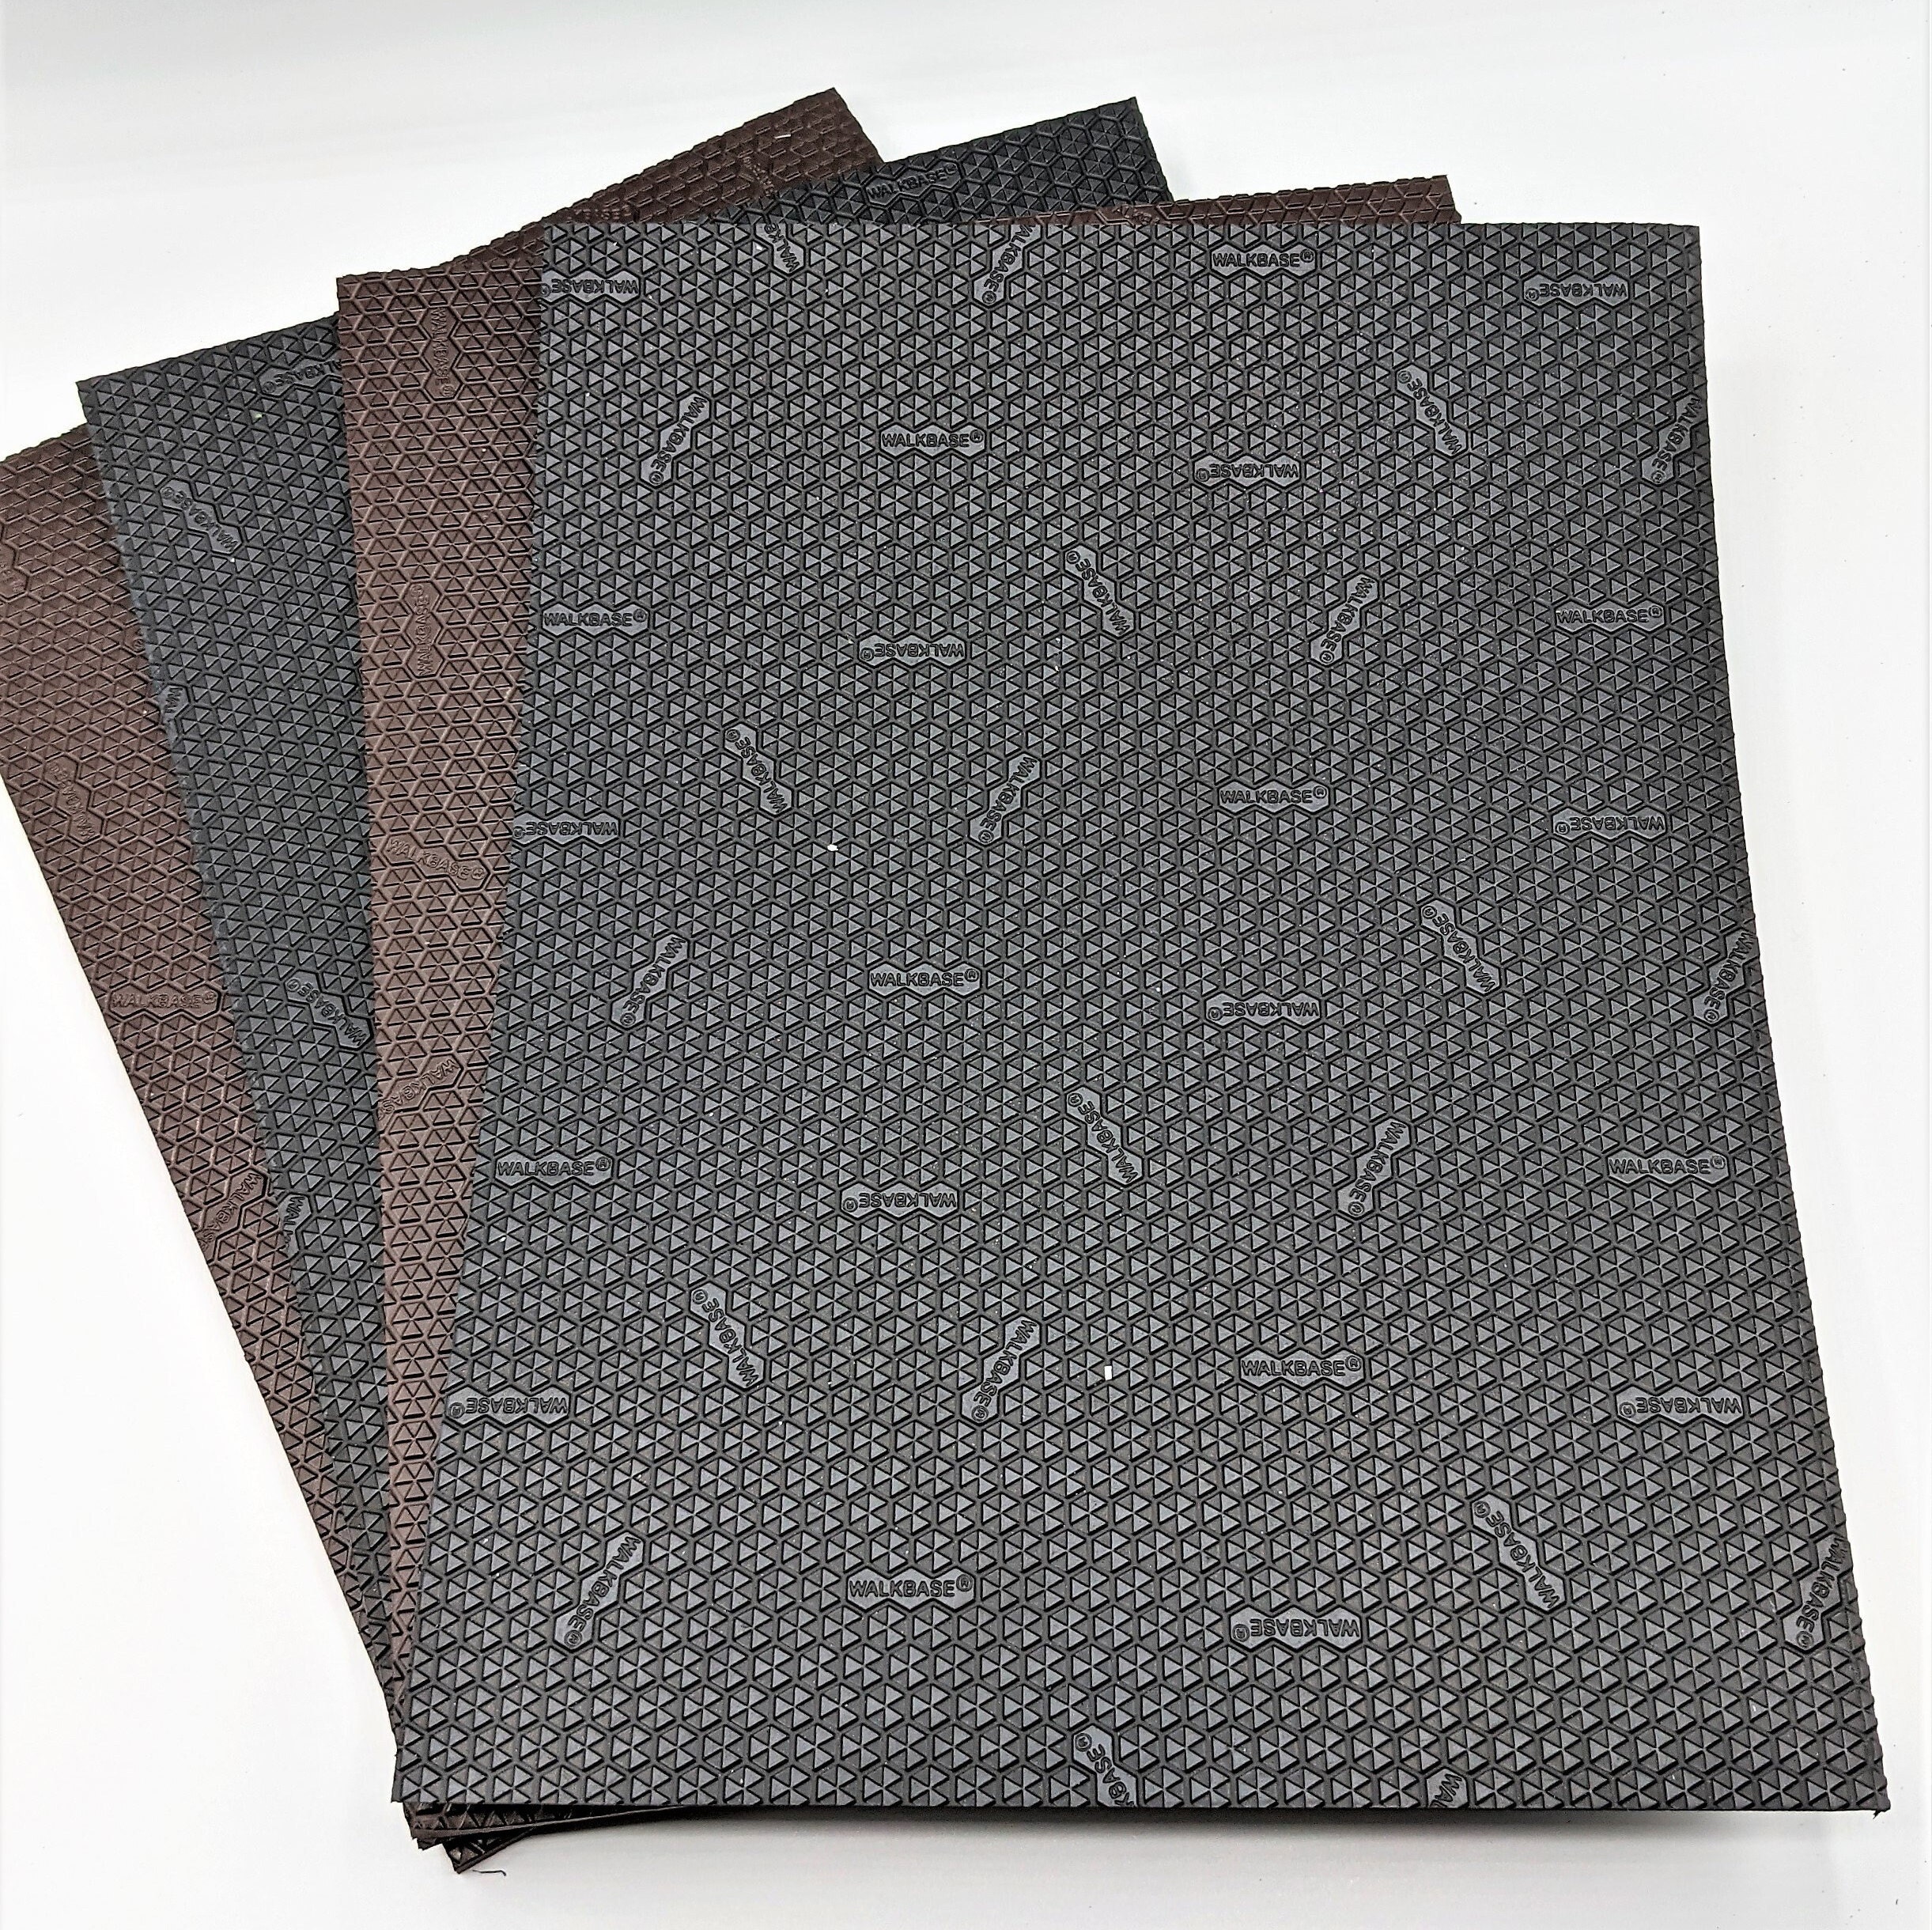 Construction Paper Black 9X12, 1 - Dillons Food Stores